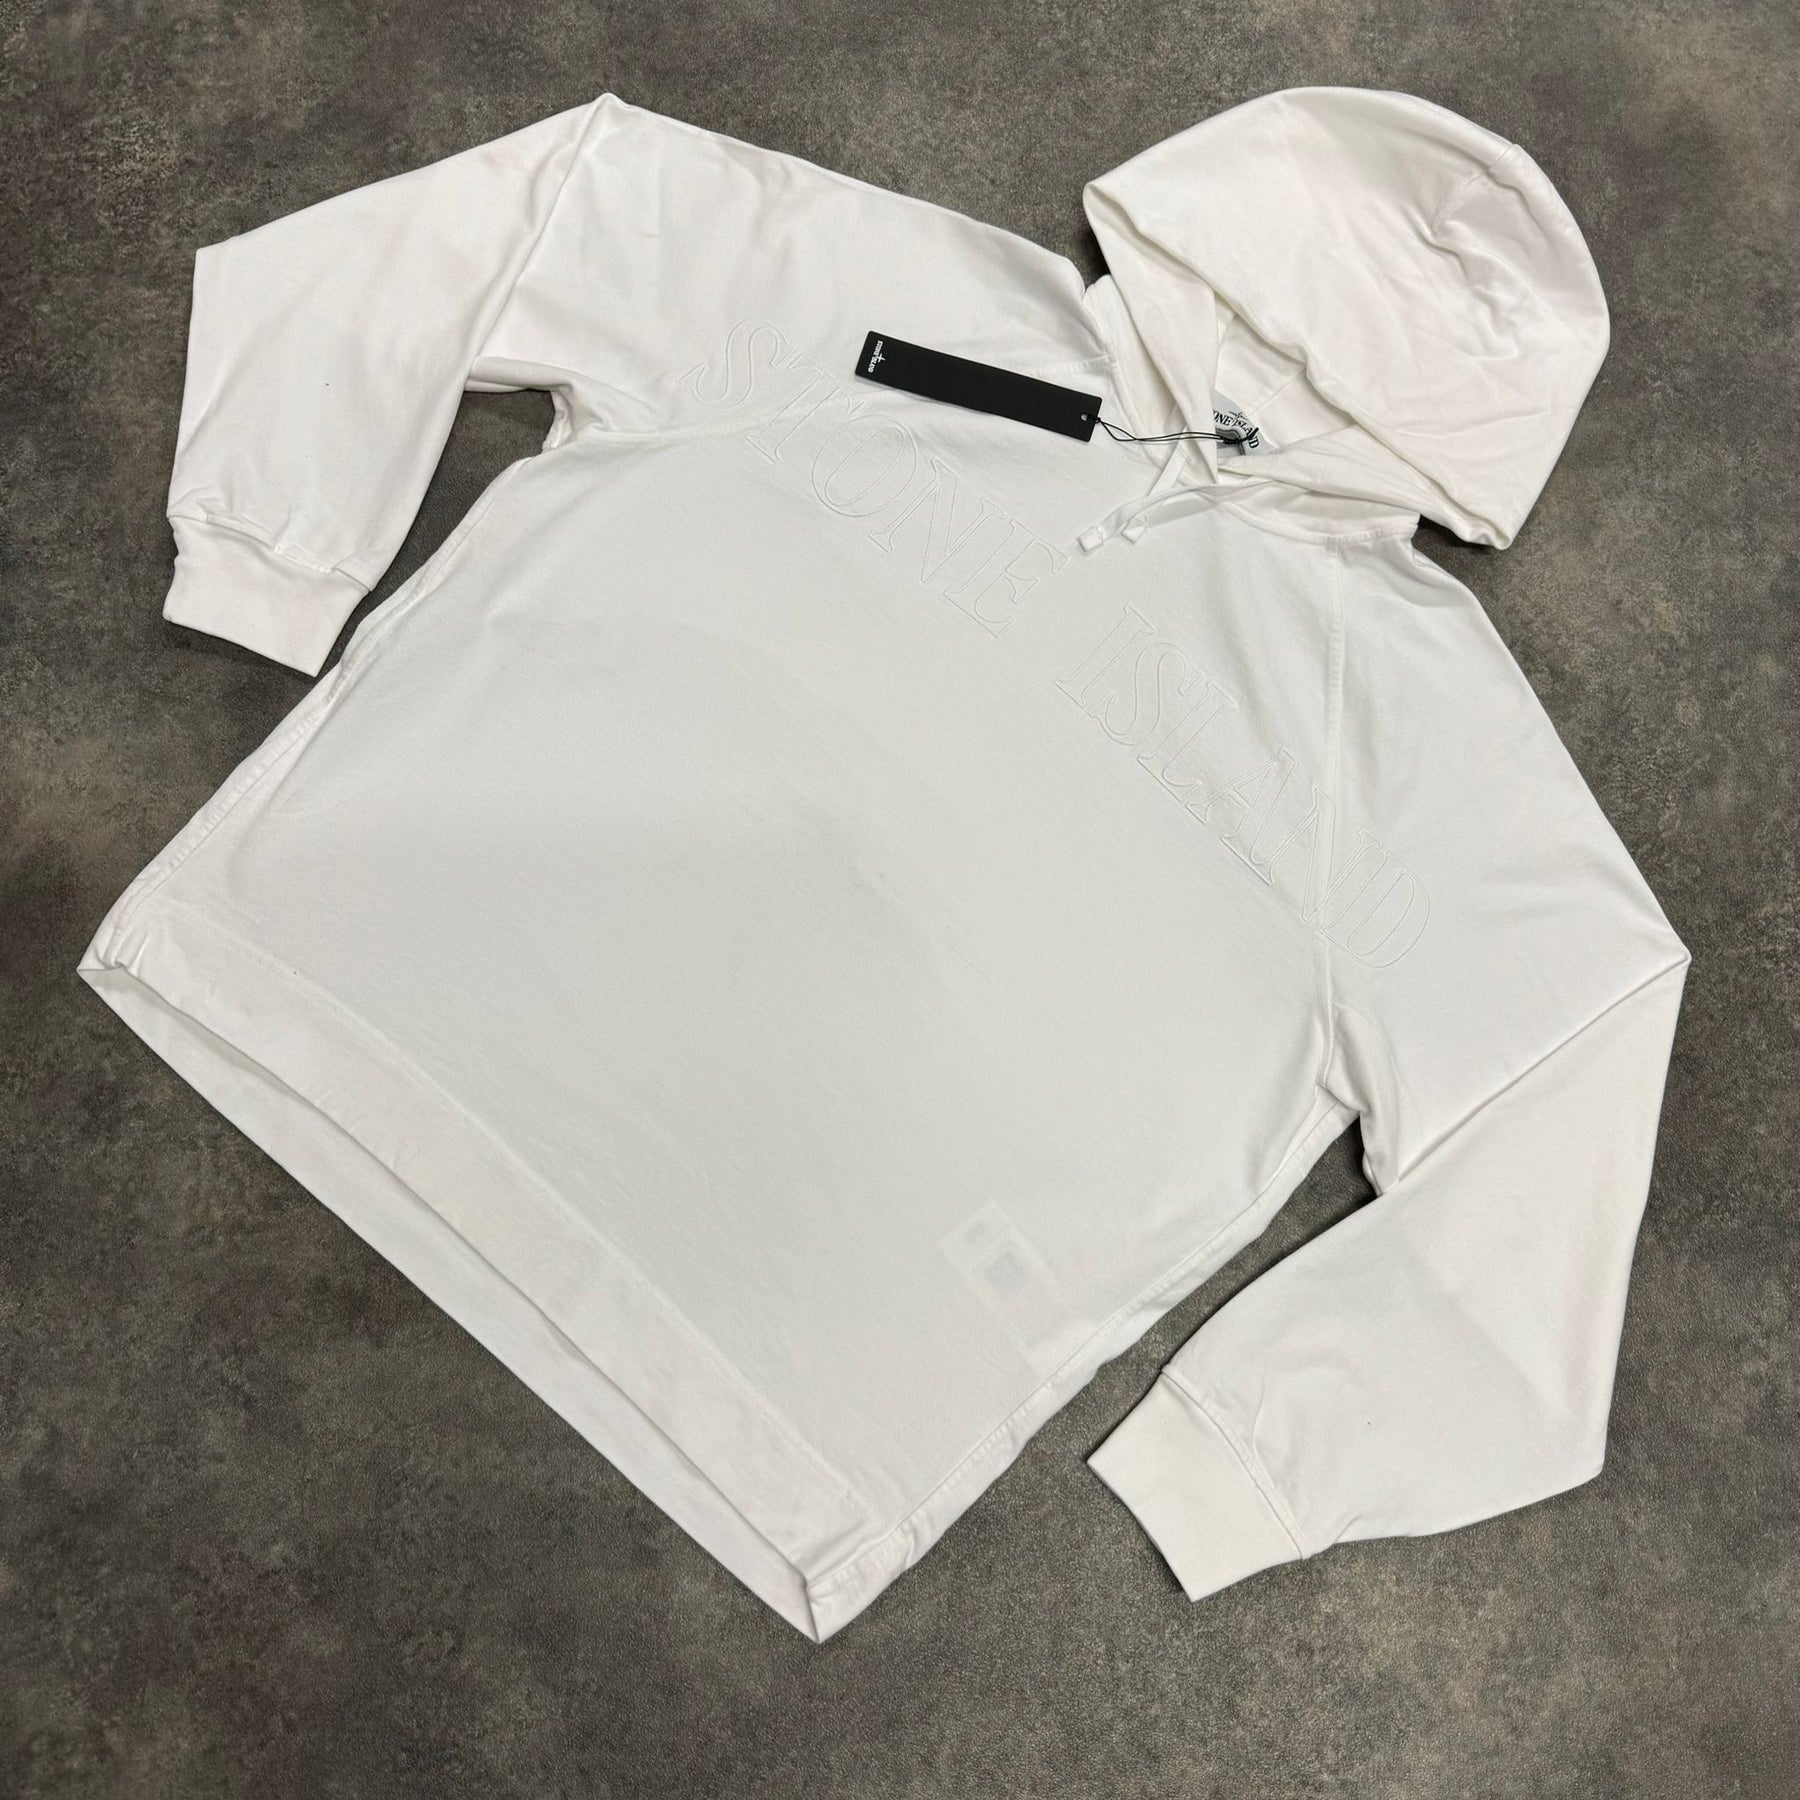 STONE ISLAND MARINA OTTH HOODIE SPELL OUT LOGO WHITE - SAMPLE